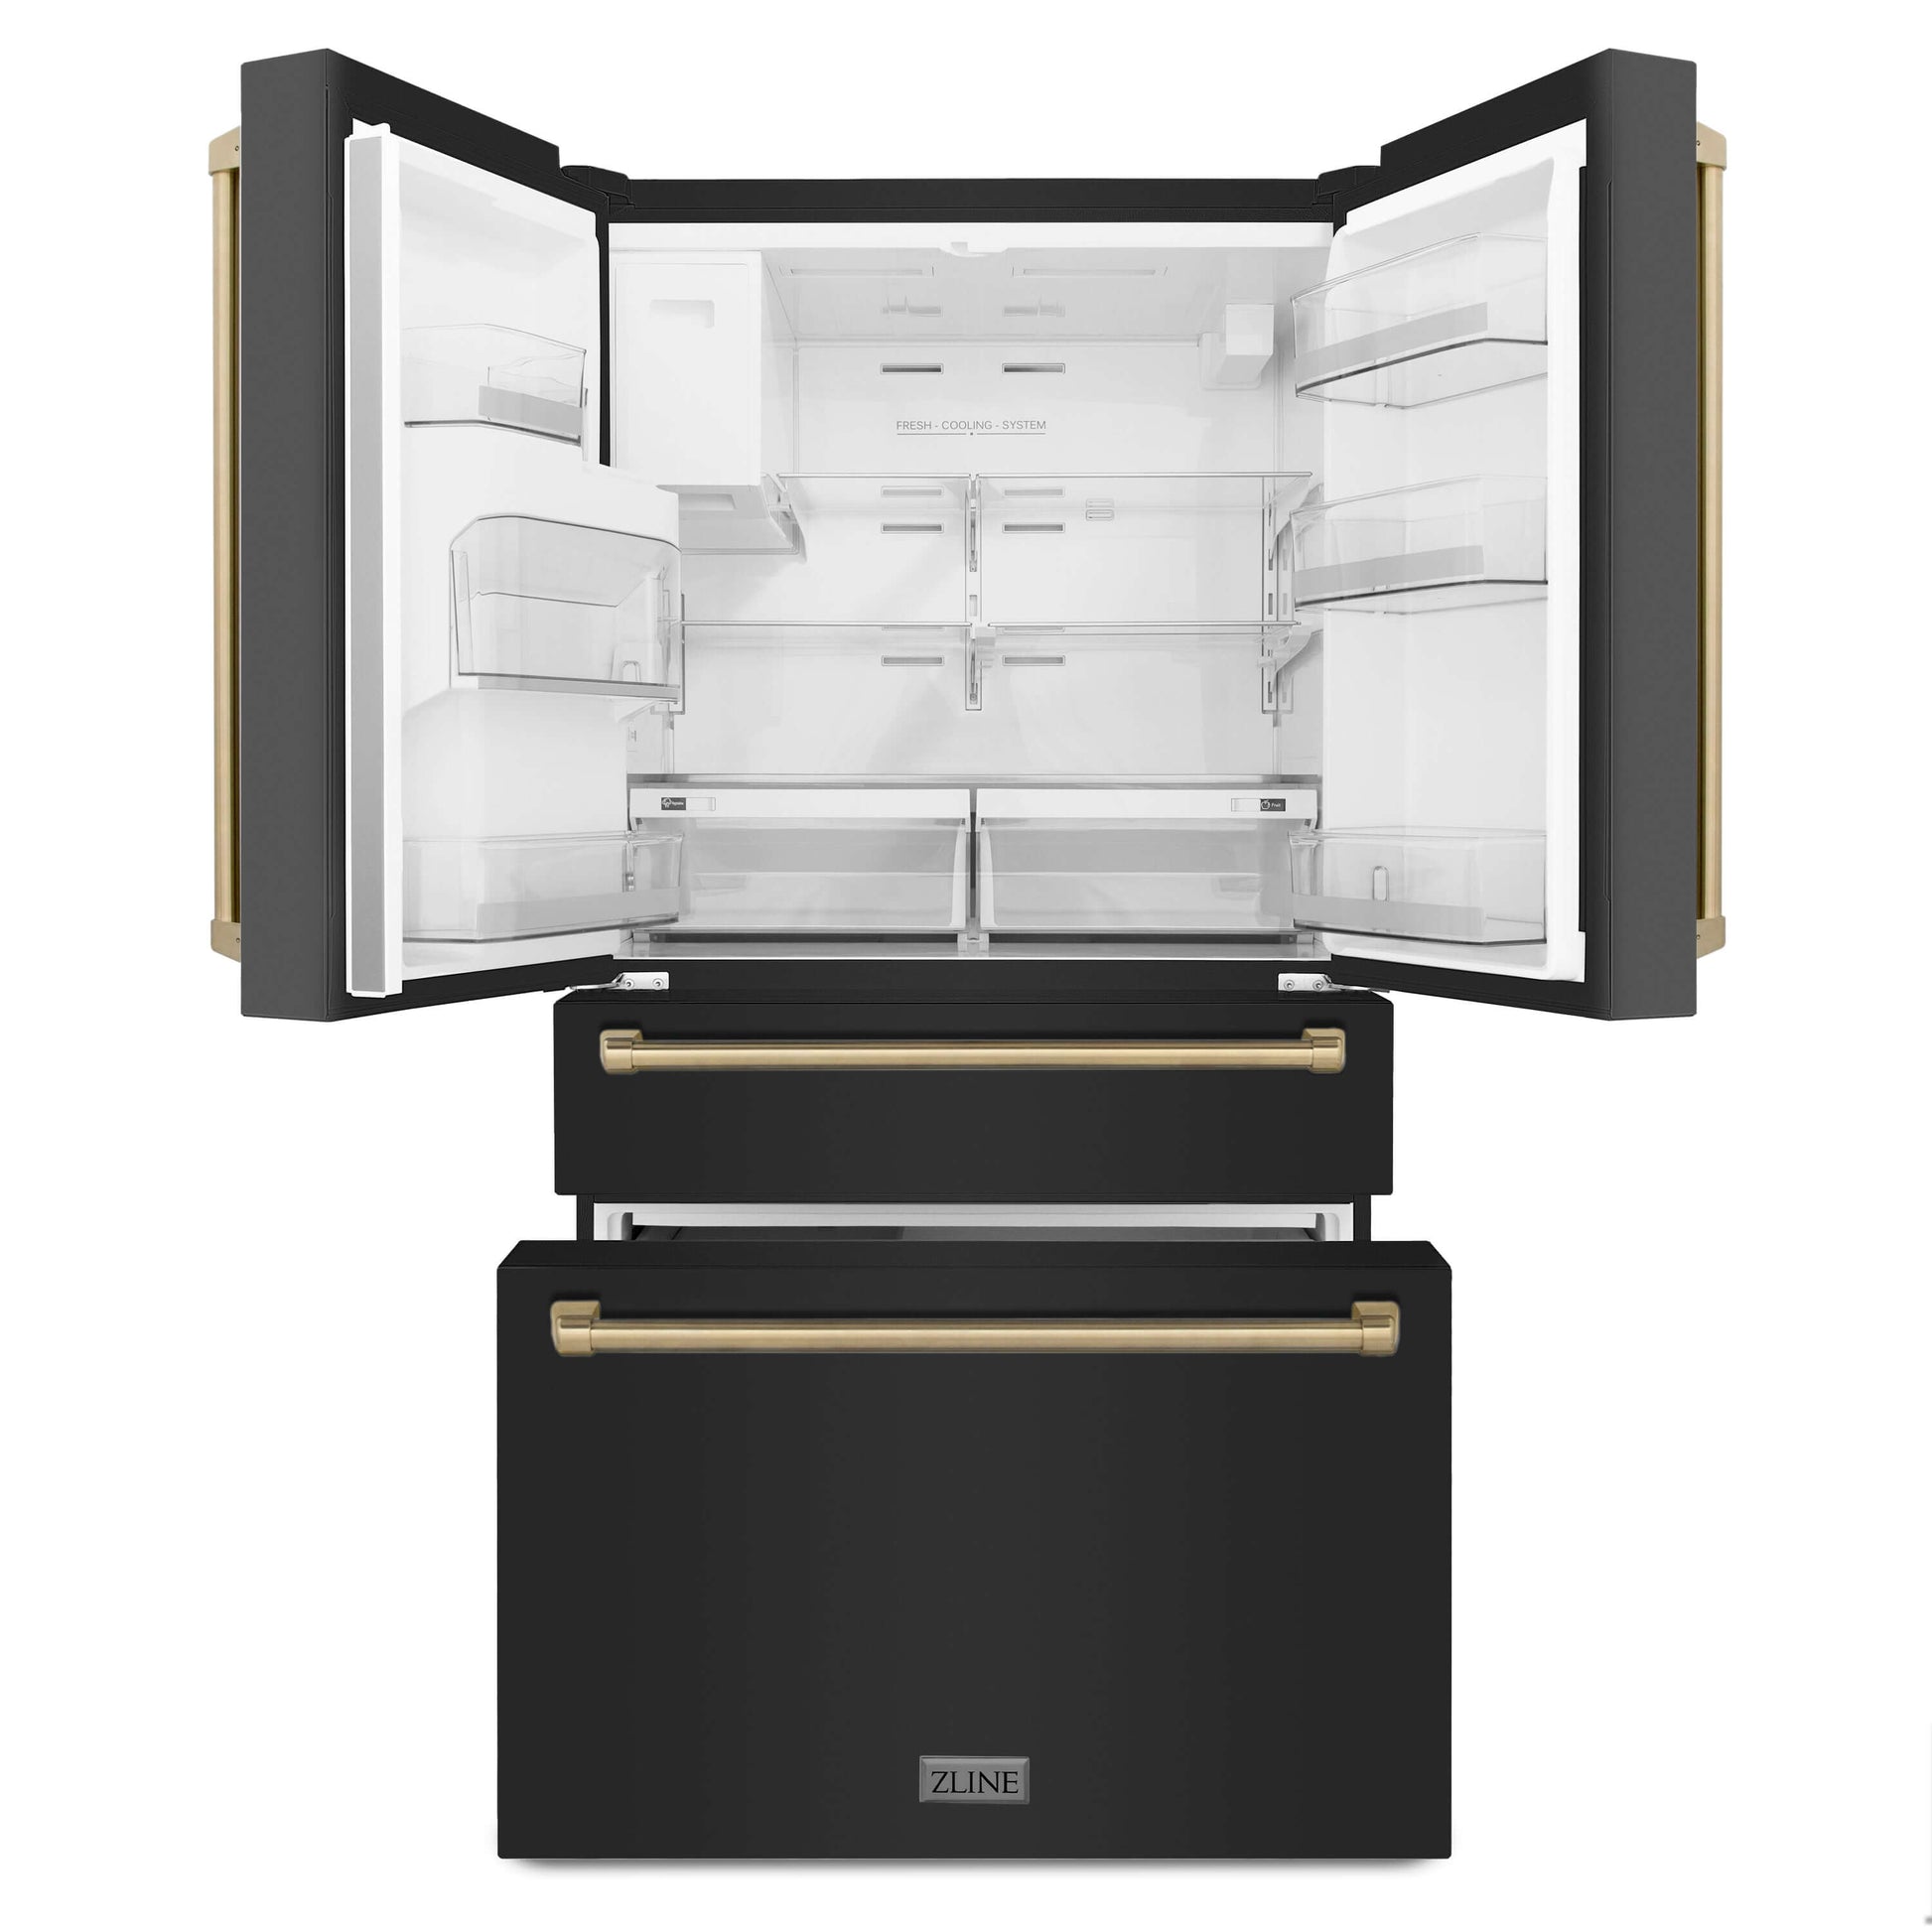 ZLINE Autograph Edition 36 in. 21.6 cu. ft Freestanding French Door Refrigerator with Water and Ice Dispenser in Fingerprint Resistant Black Stainless Steel with Champagne Bronze Accents (RFMZ-W-36-BS-CB) front, doors and bottom freezer drawers open.